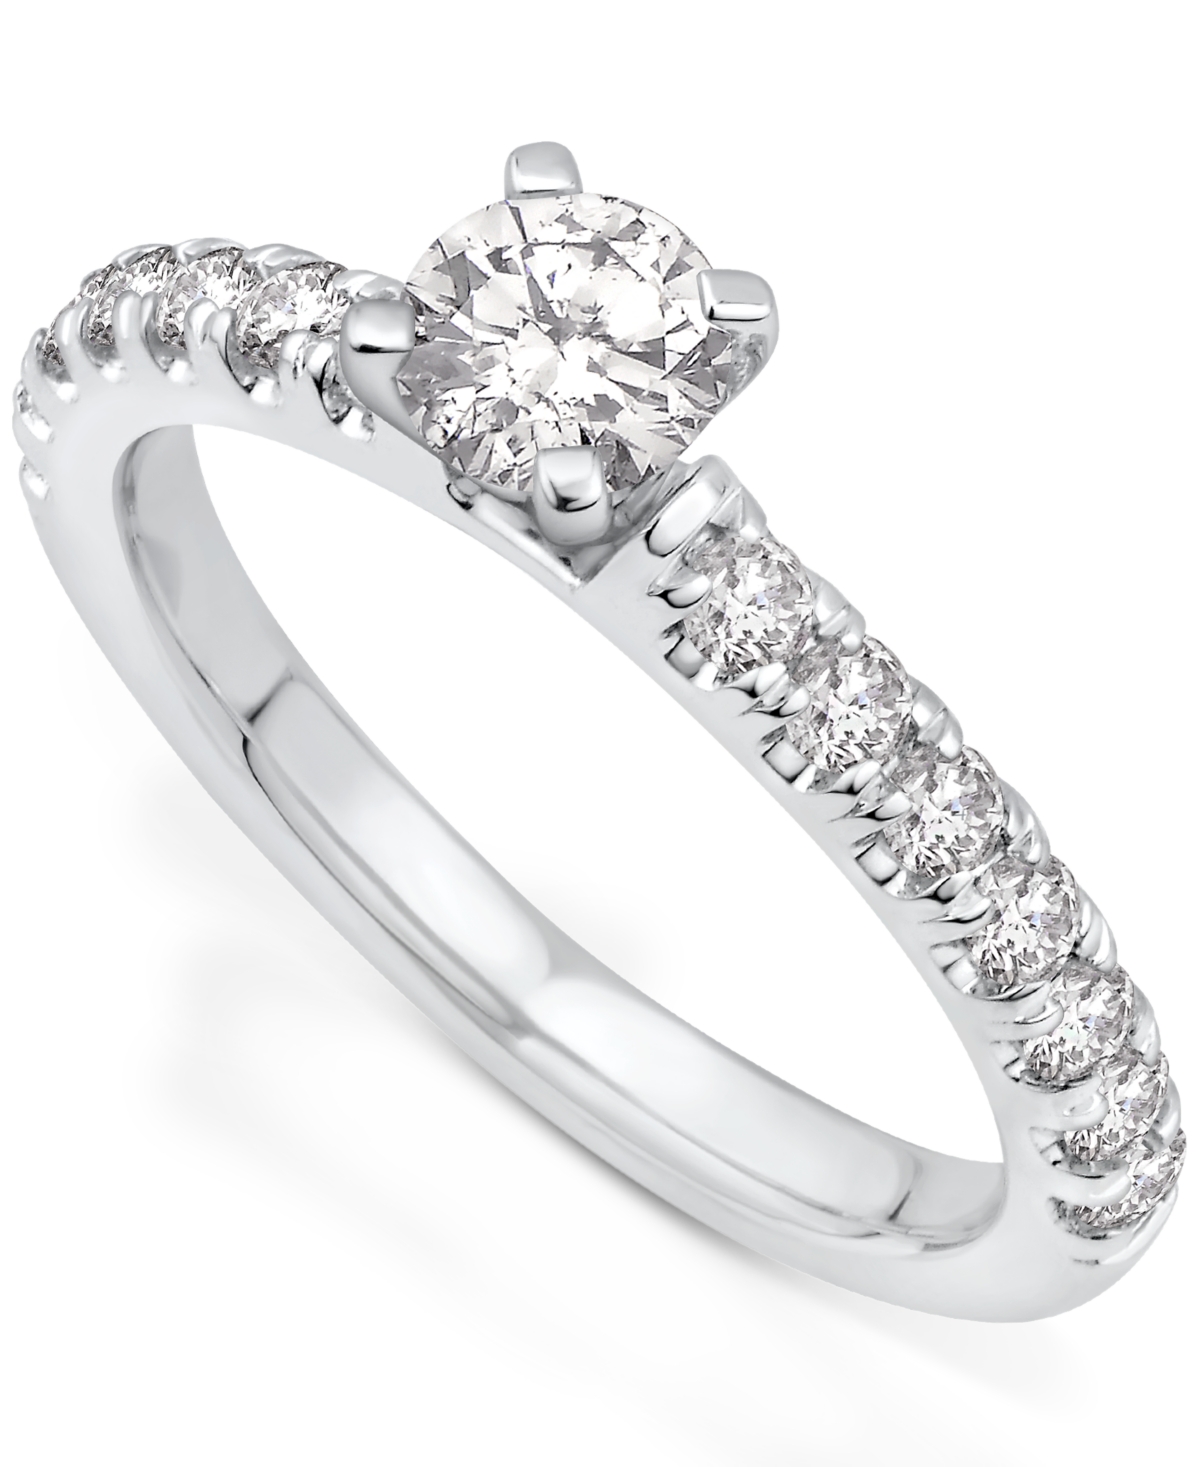 Gia Certified Diamond Engagement Ring (1 ct. t.w.) in 14k White Gold - White Gold